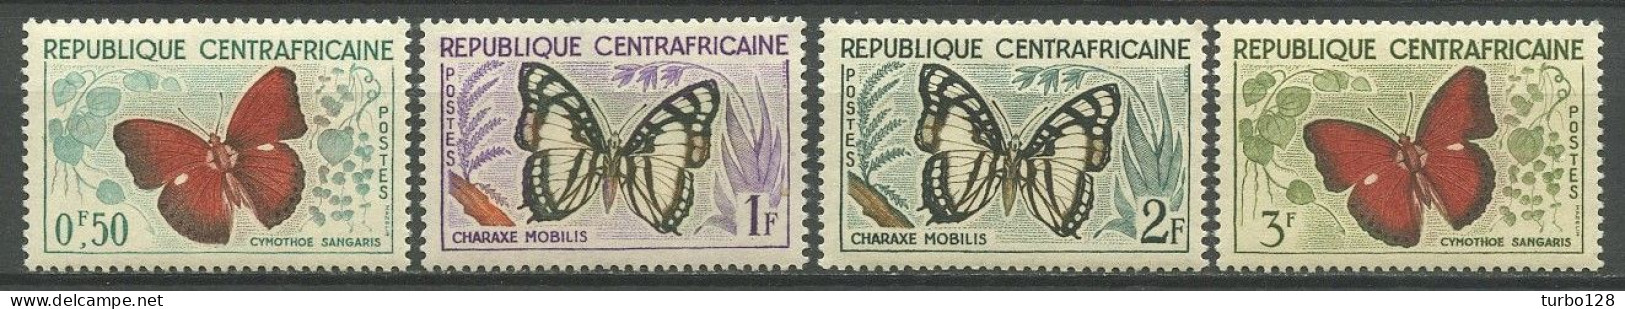 CENTRAFRICAINE 1960 N° 4/7 ** Neufs MNH Superbes C 1 € Faune Papillons Butterflies Cymothoe Sangaris Charaxes  Animaux - Central African Republic